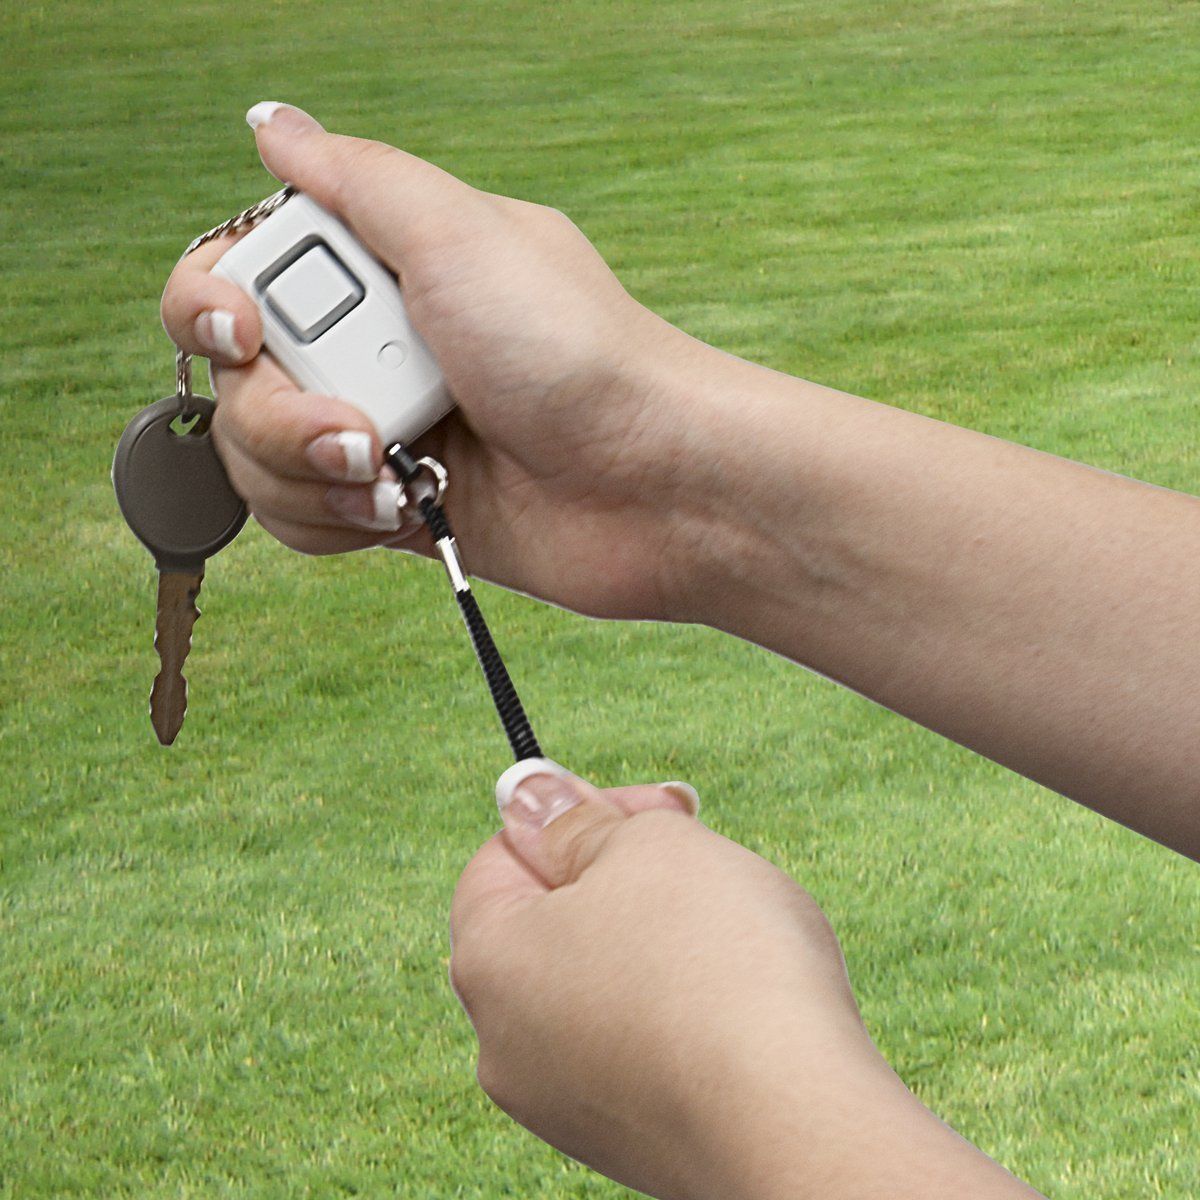 Personal Security Keychain Alarm - Use Case